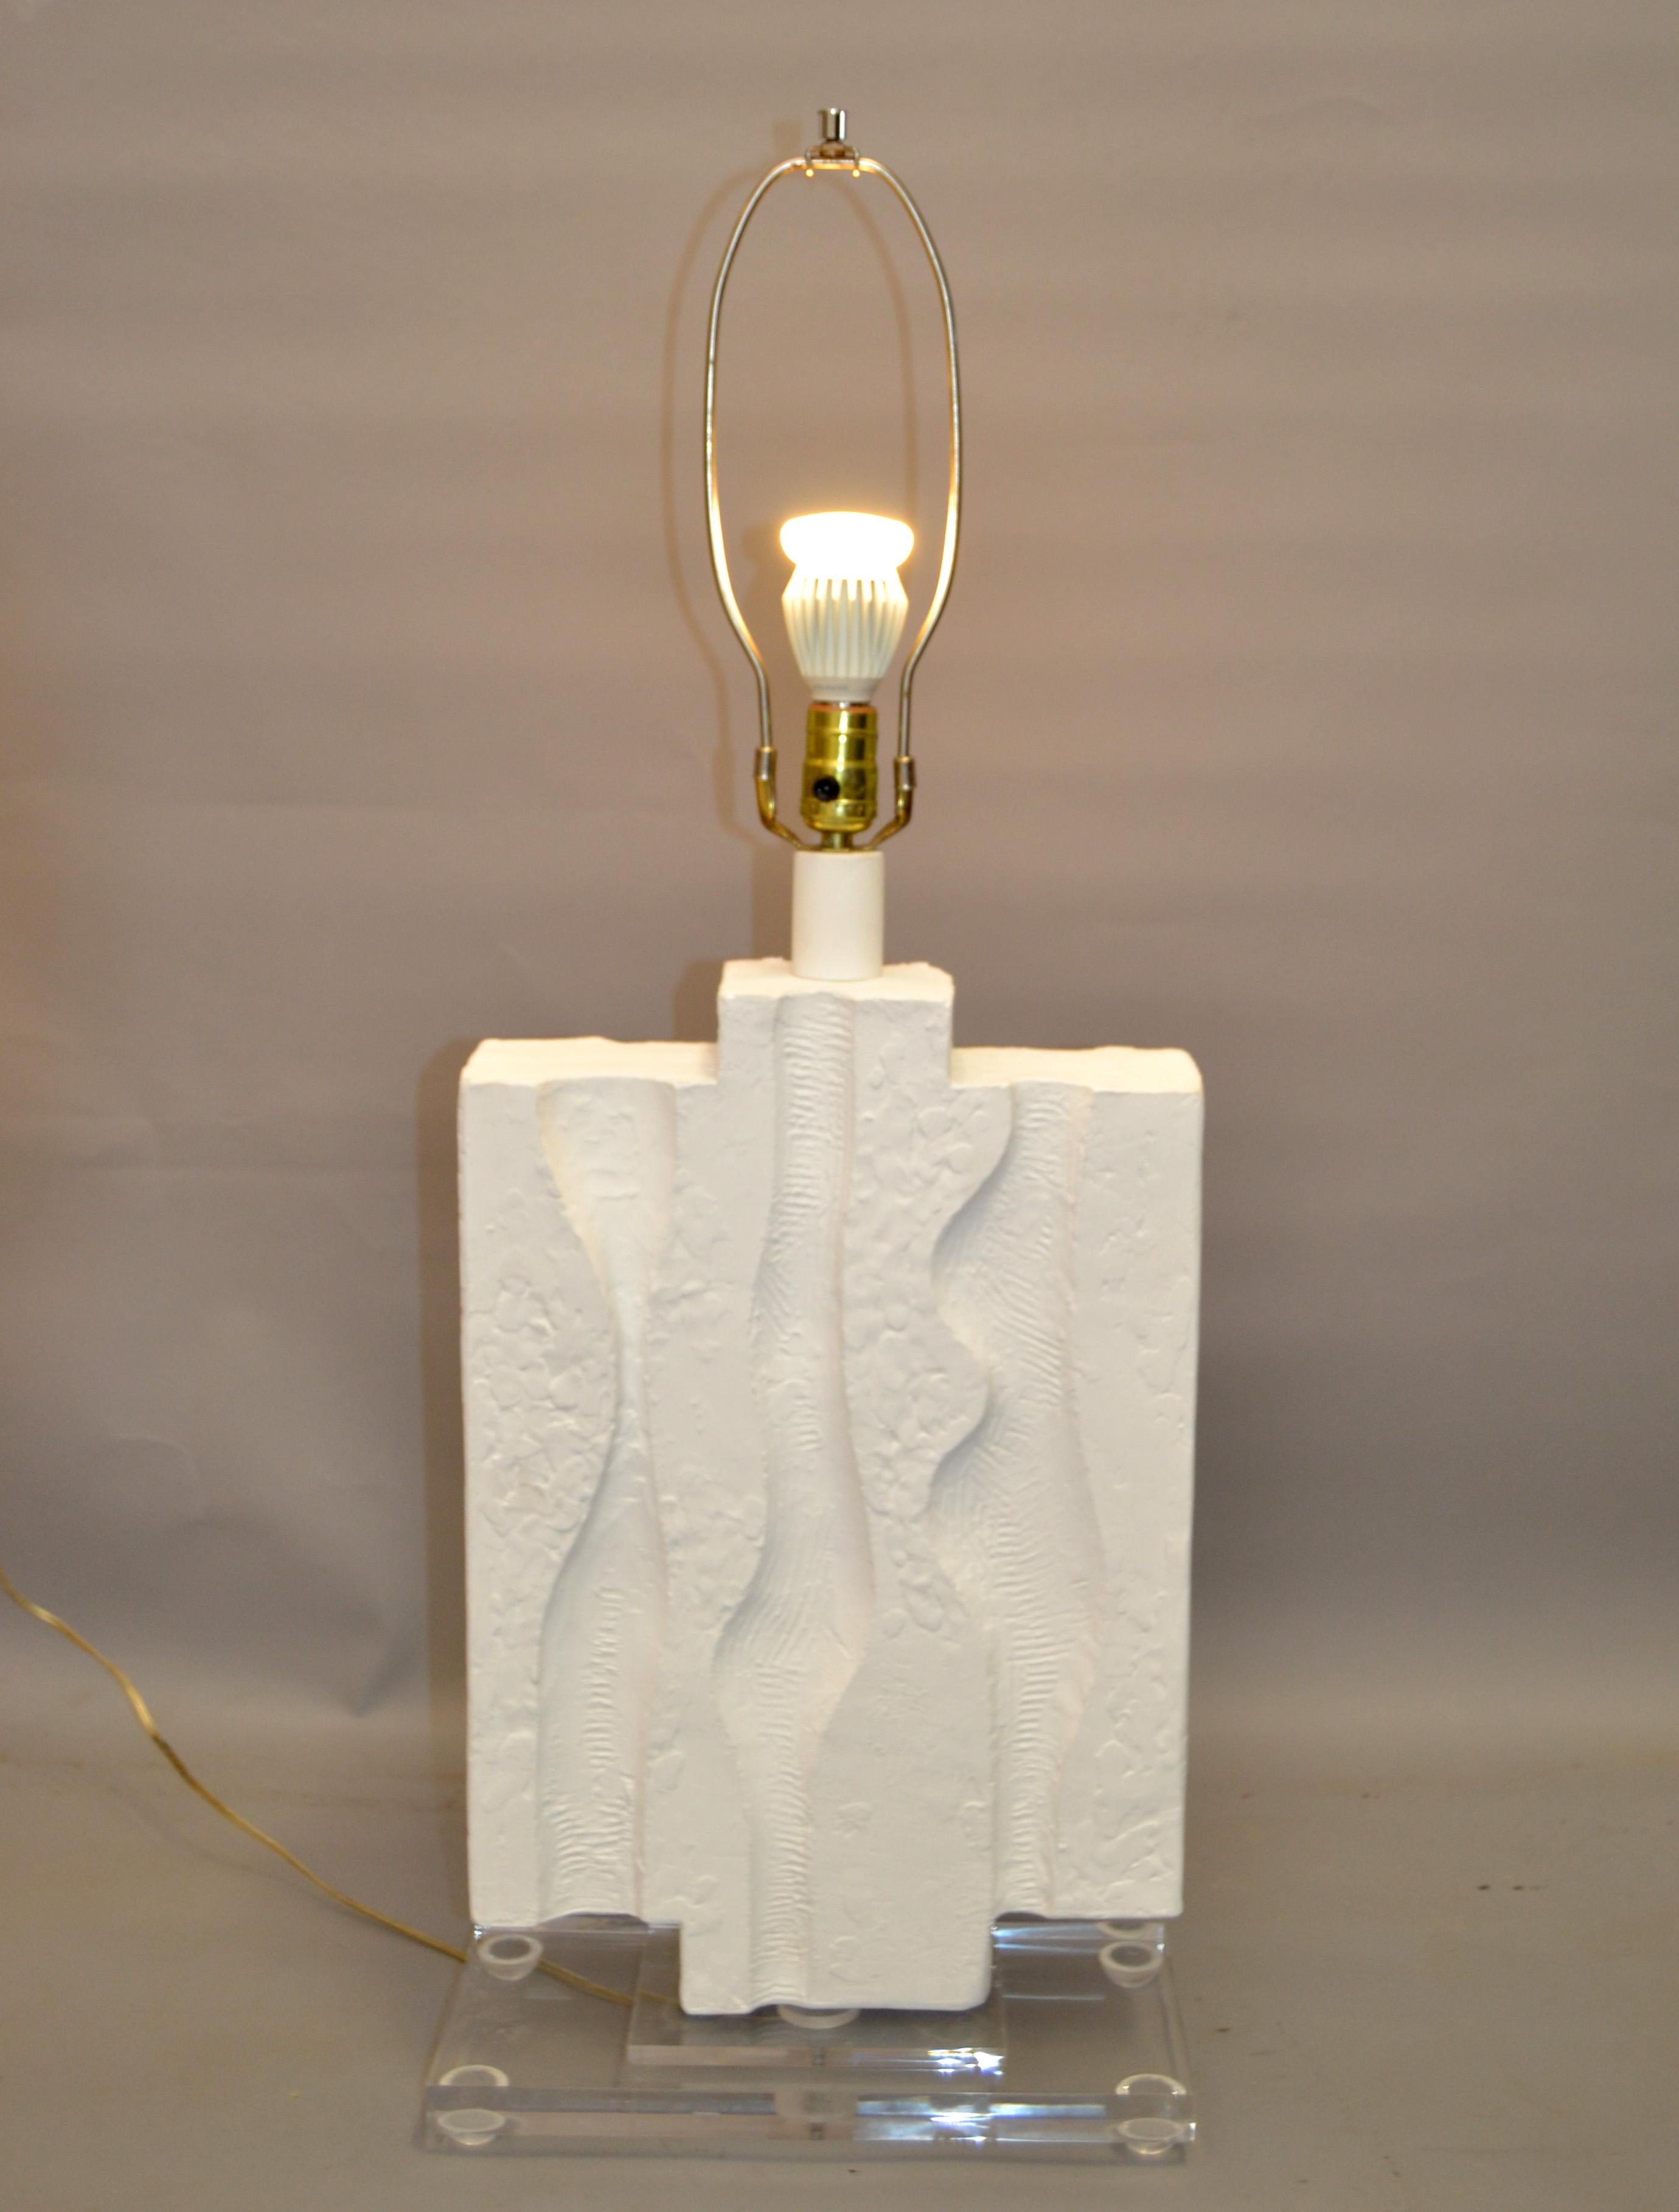 Mid-Century Modern table lamp in white Gesso Finish.
Plaster undertone with textured pattern a chrome neck.
Lamp is supported by 2 inches rectangle Acrylic Base, measures 6.75 x 13.63 inches.
US Rewiring and takes a regular or LED Light